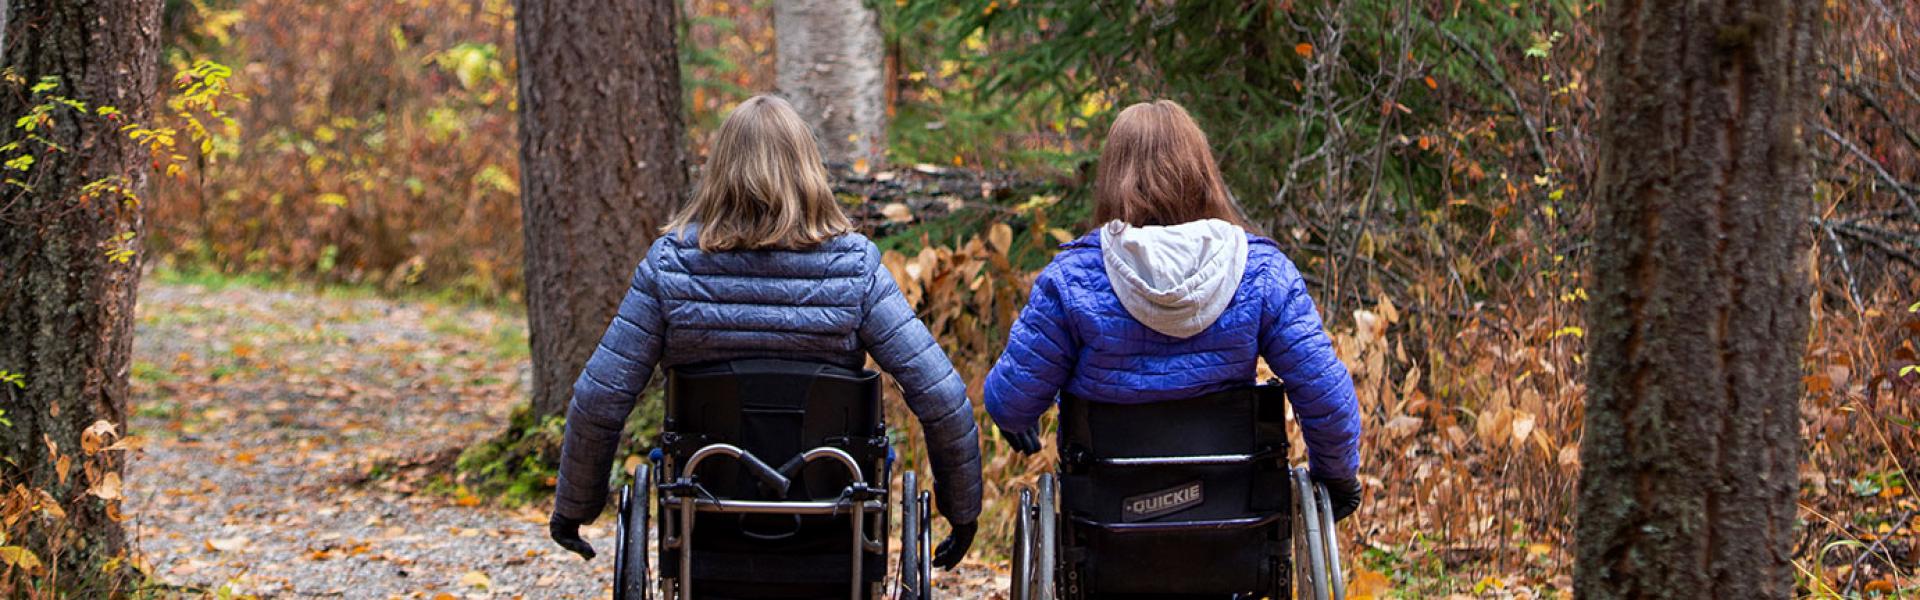 Two people on accessible trail, with wheelchairs